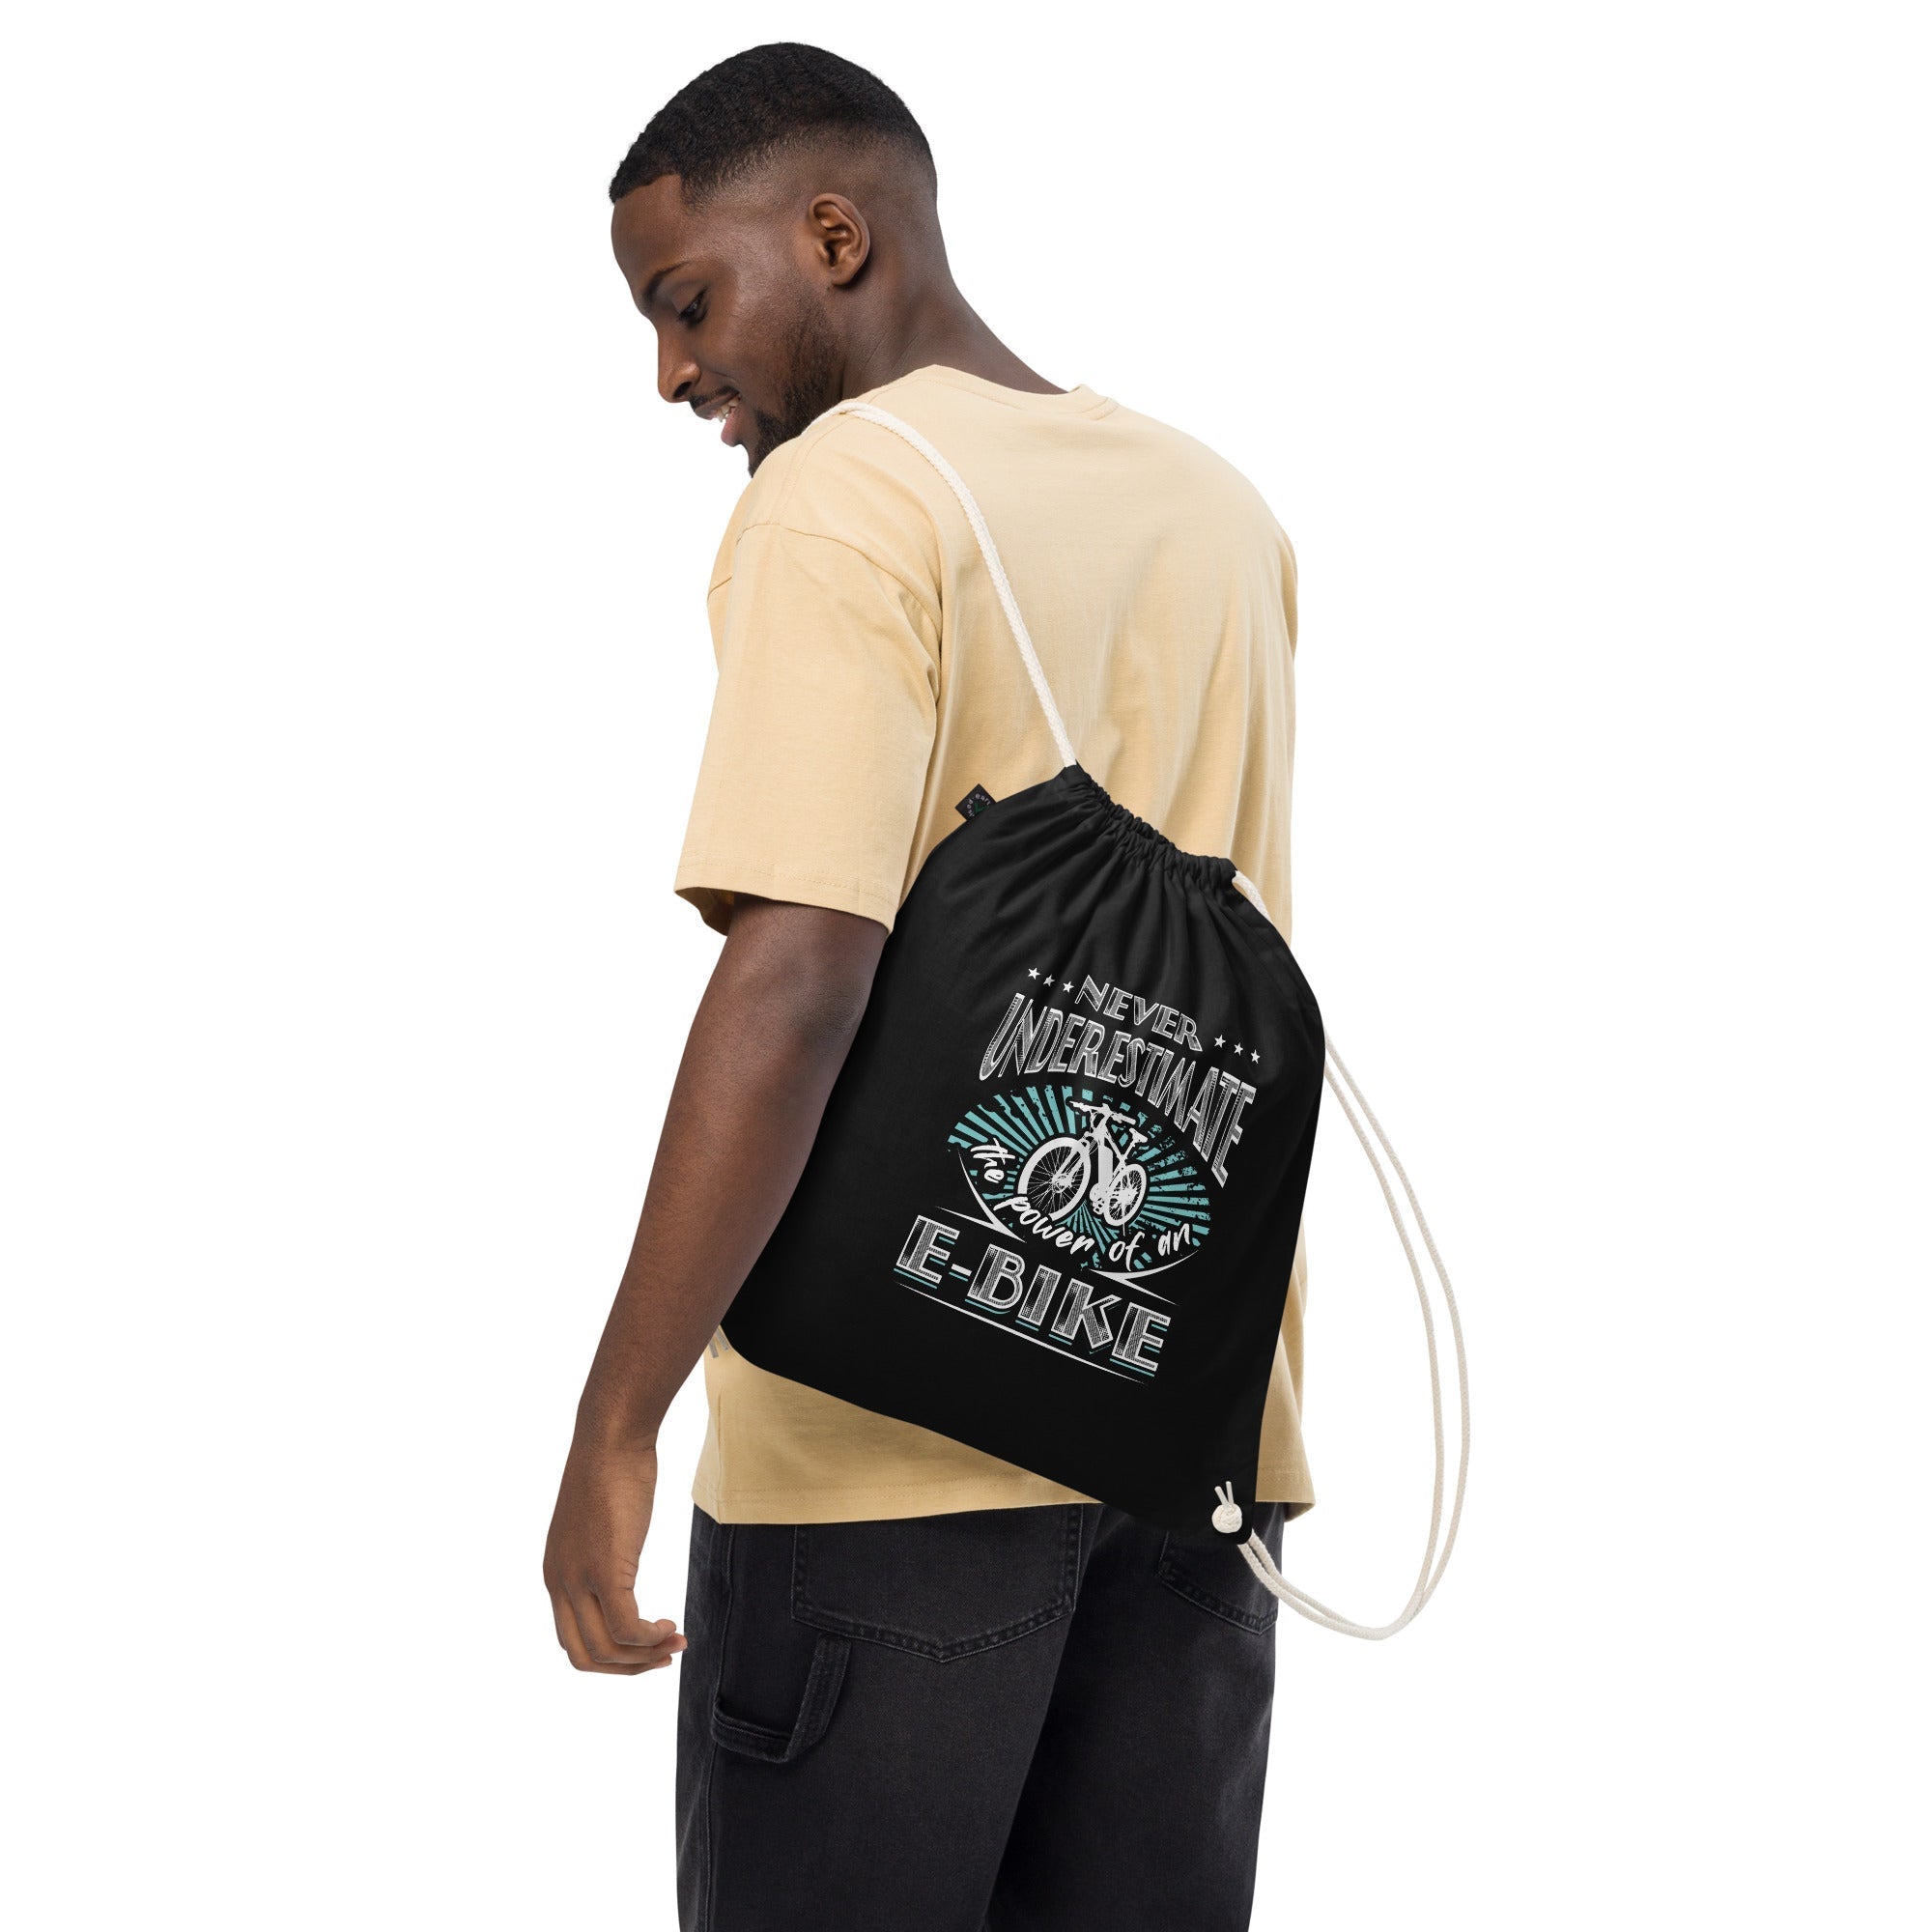 Never Underestimate the Power of an E-bike EarthPositive EP76 Organic Cotton Drawstring Bag